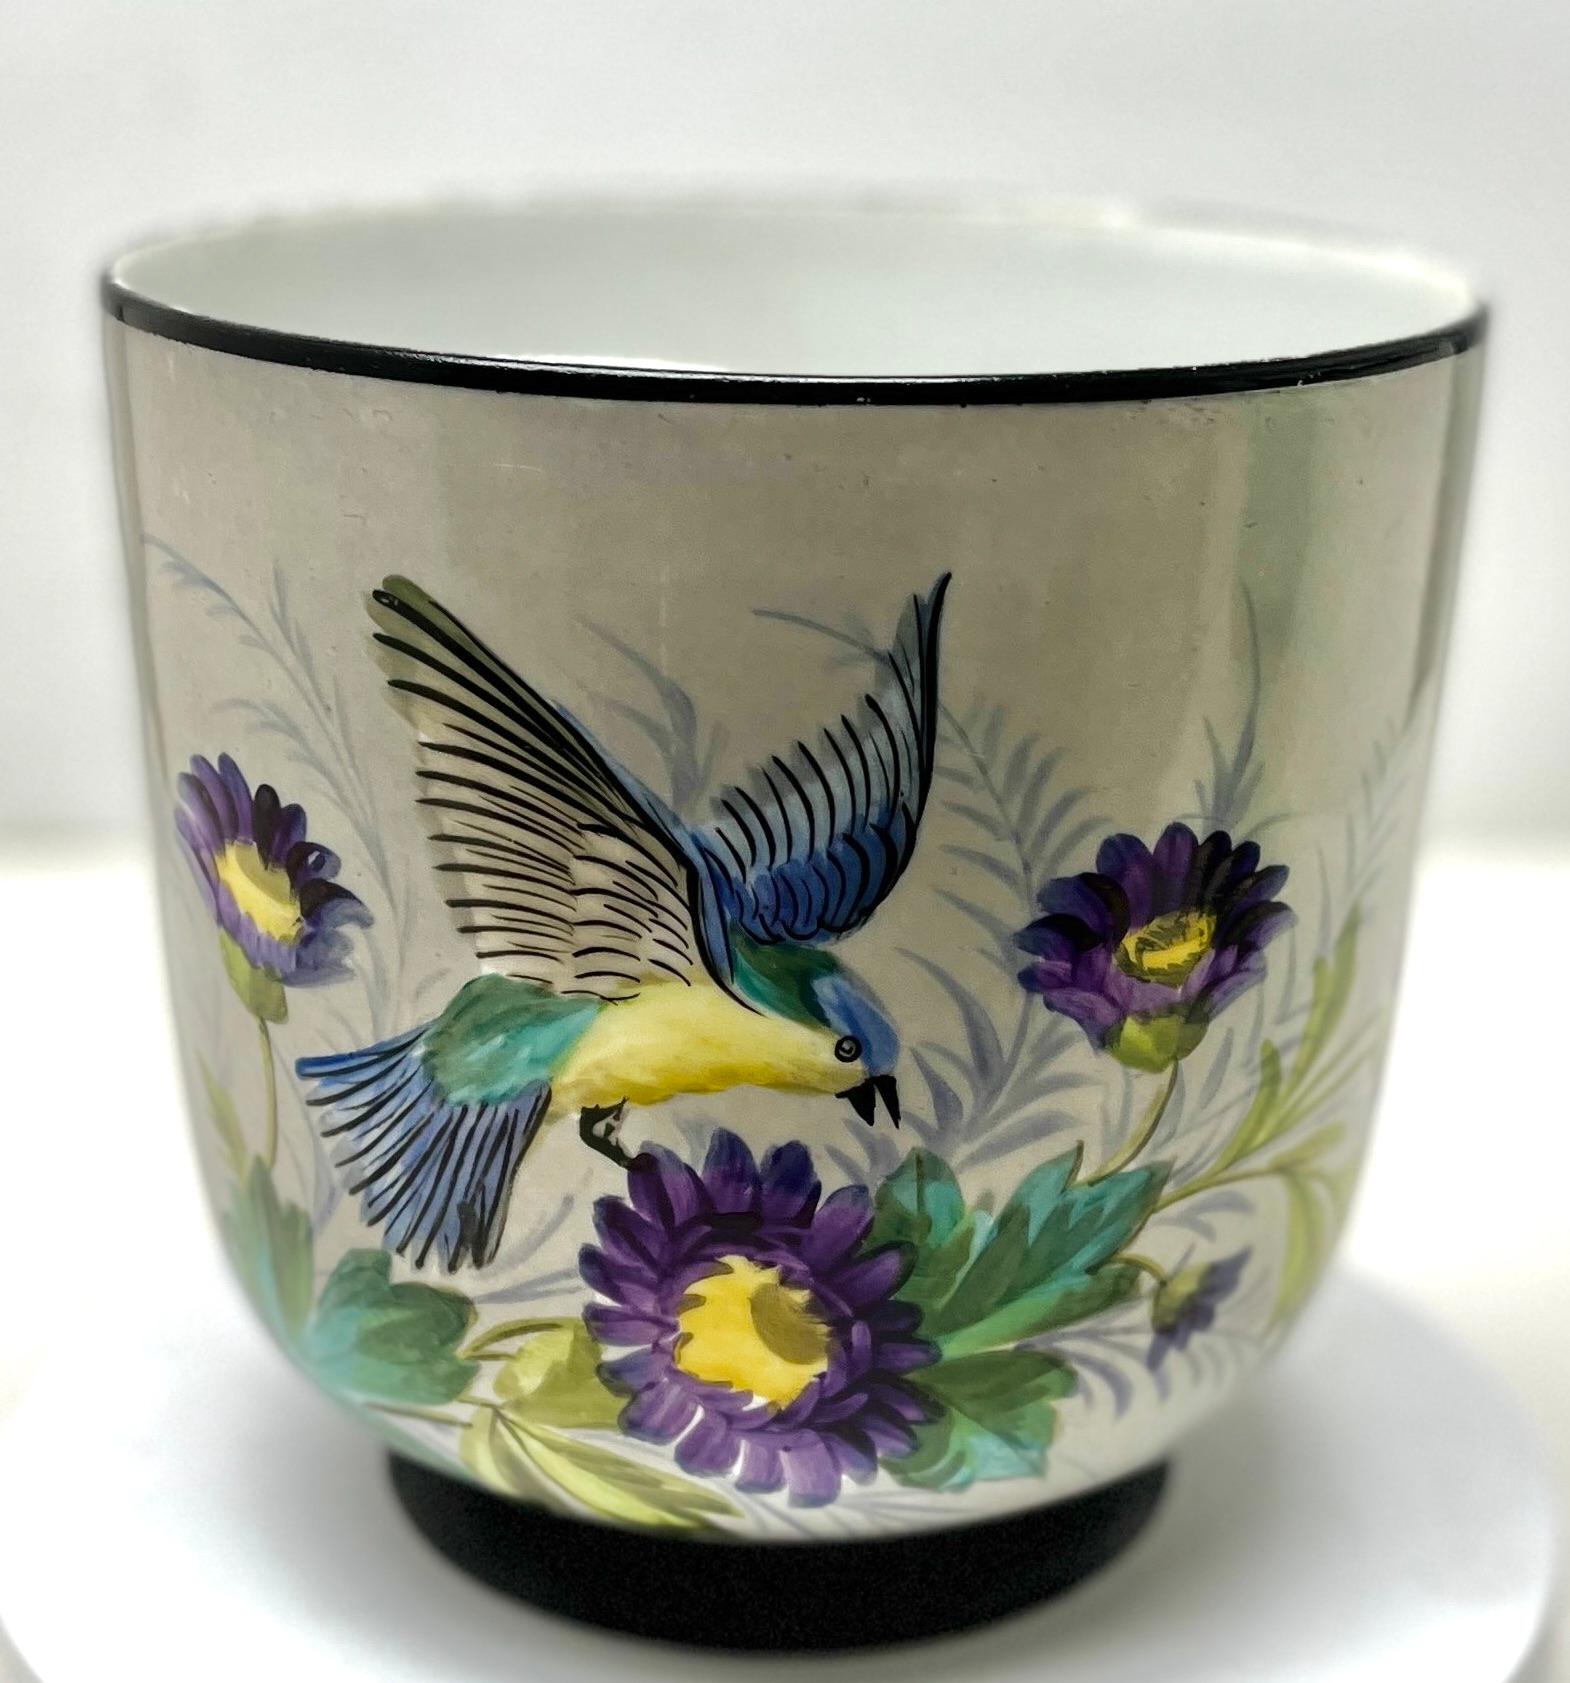 Hand-Crafted Porcelain Planter, Cachepot Hand-Painted Whit Bird and Flowers